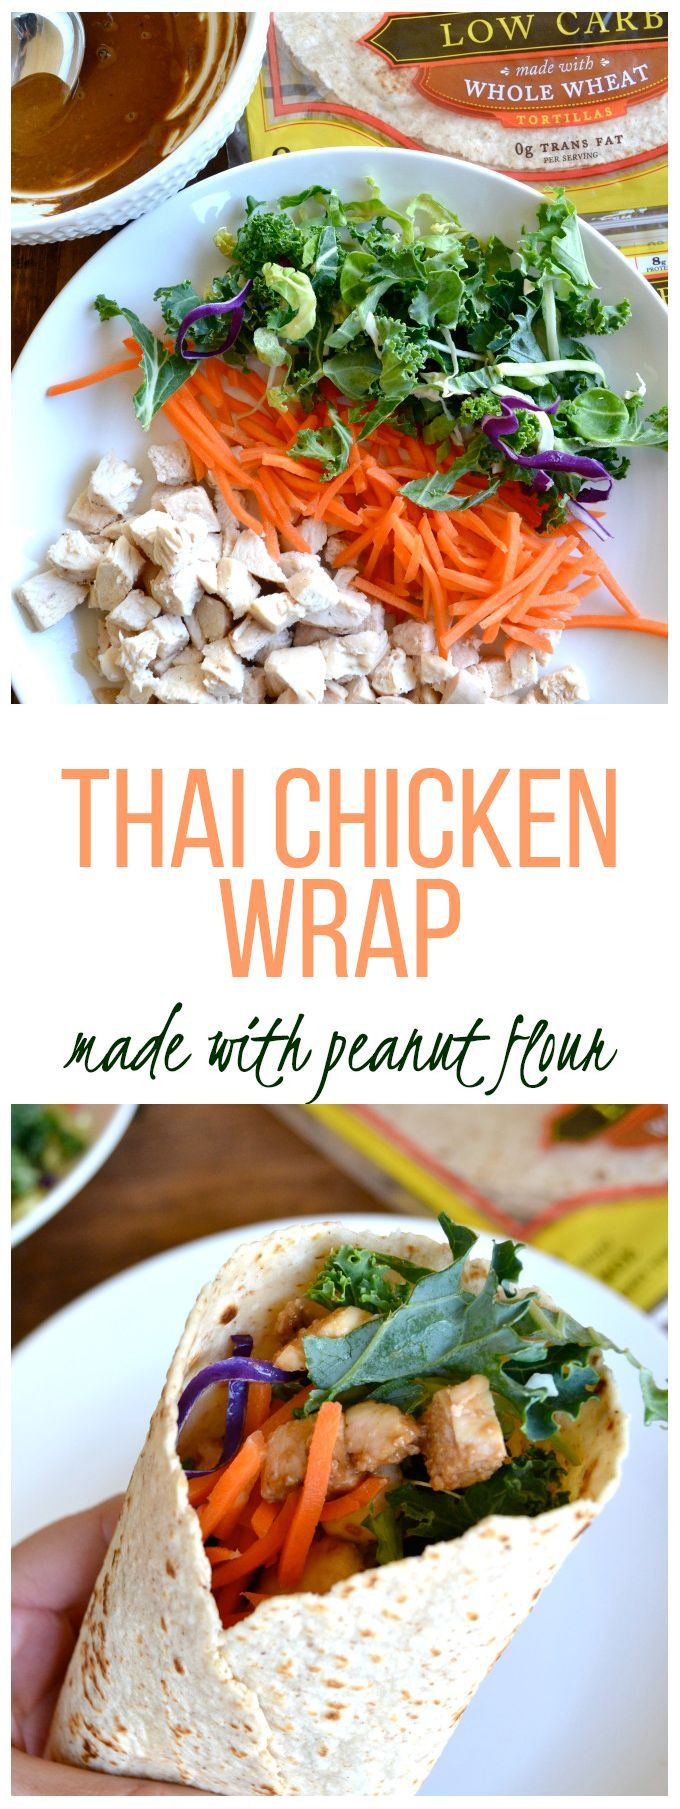 Low Calorie Chinese Recipes
 Low Calorie Thai Chicken Wrap Recipe